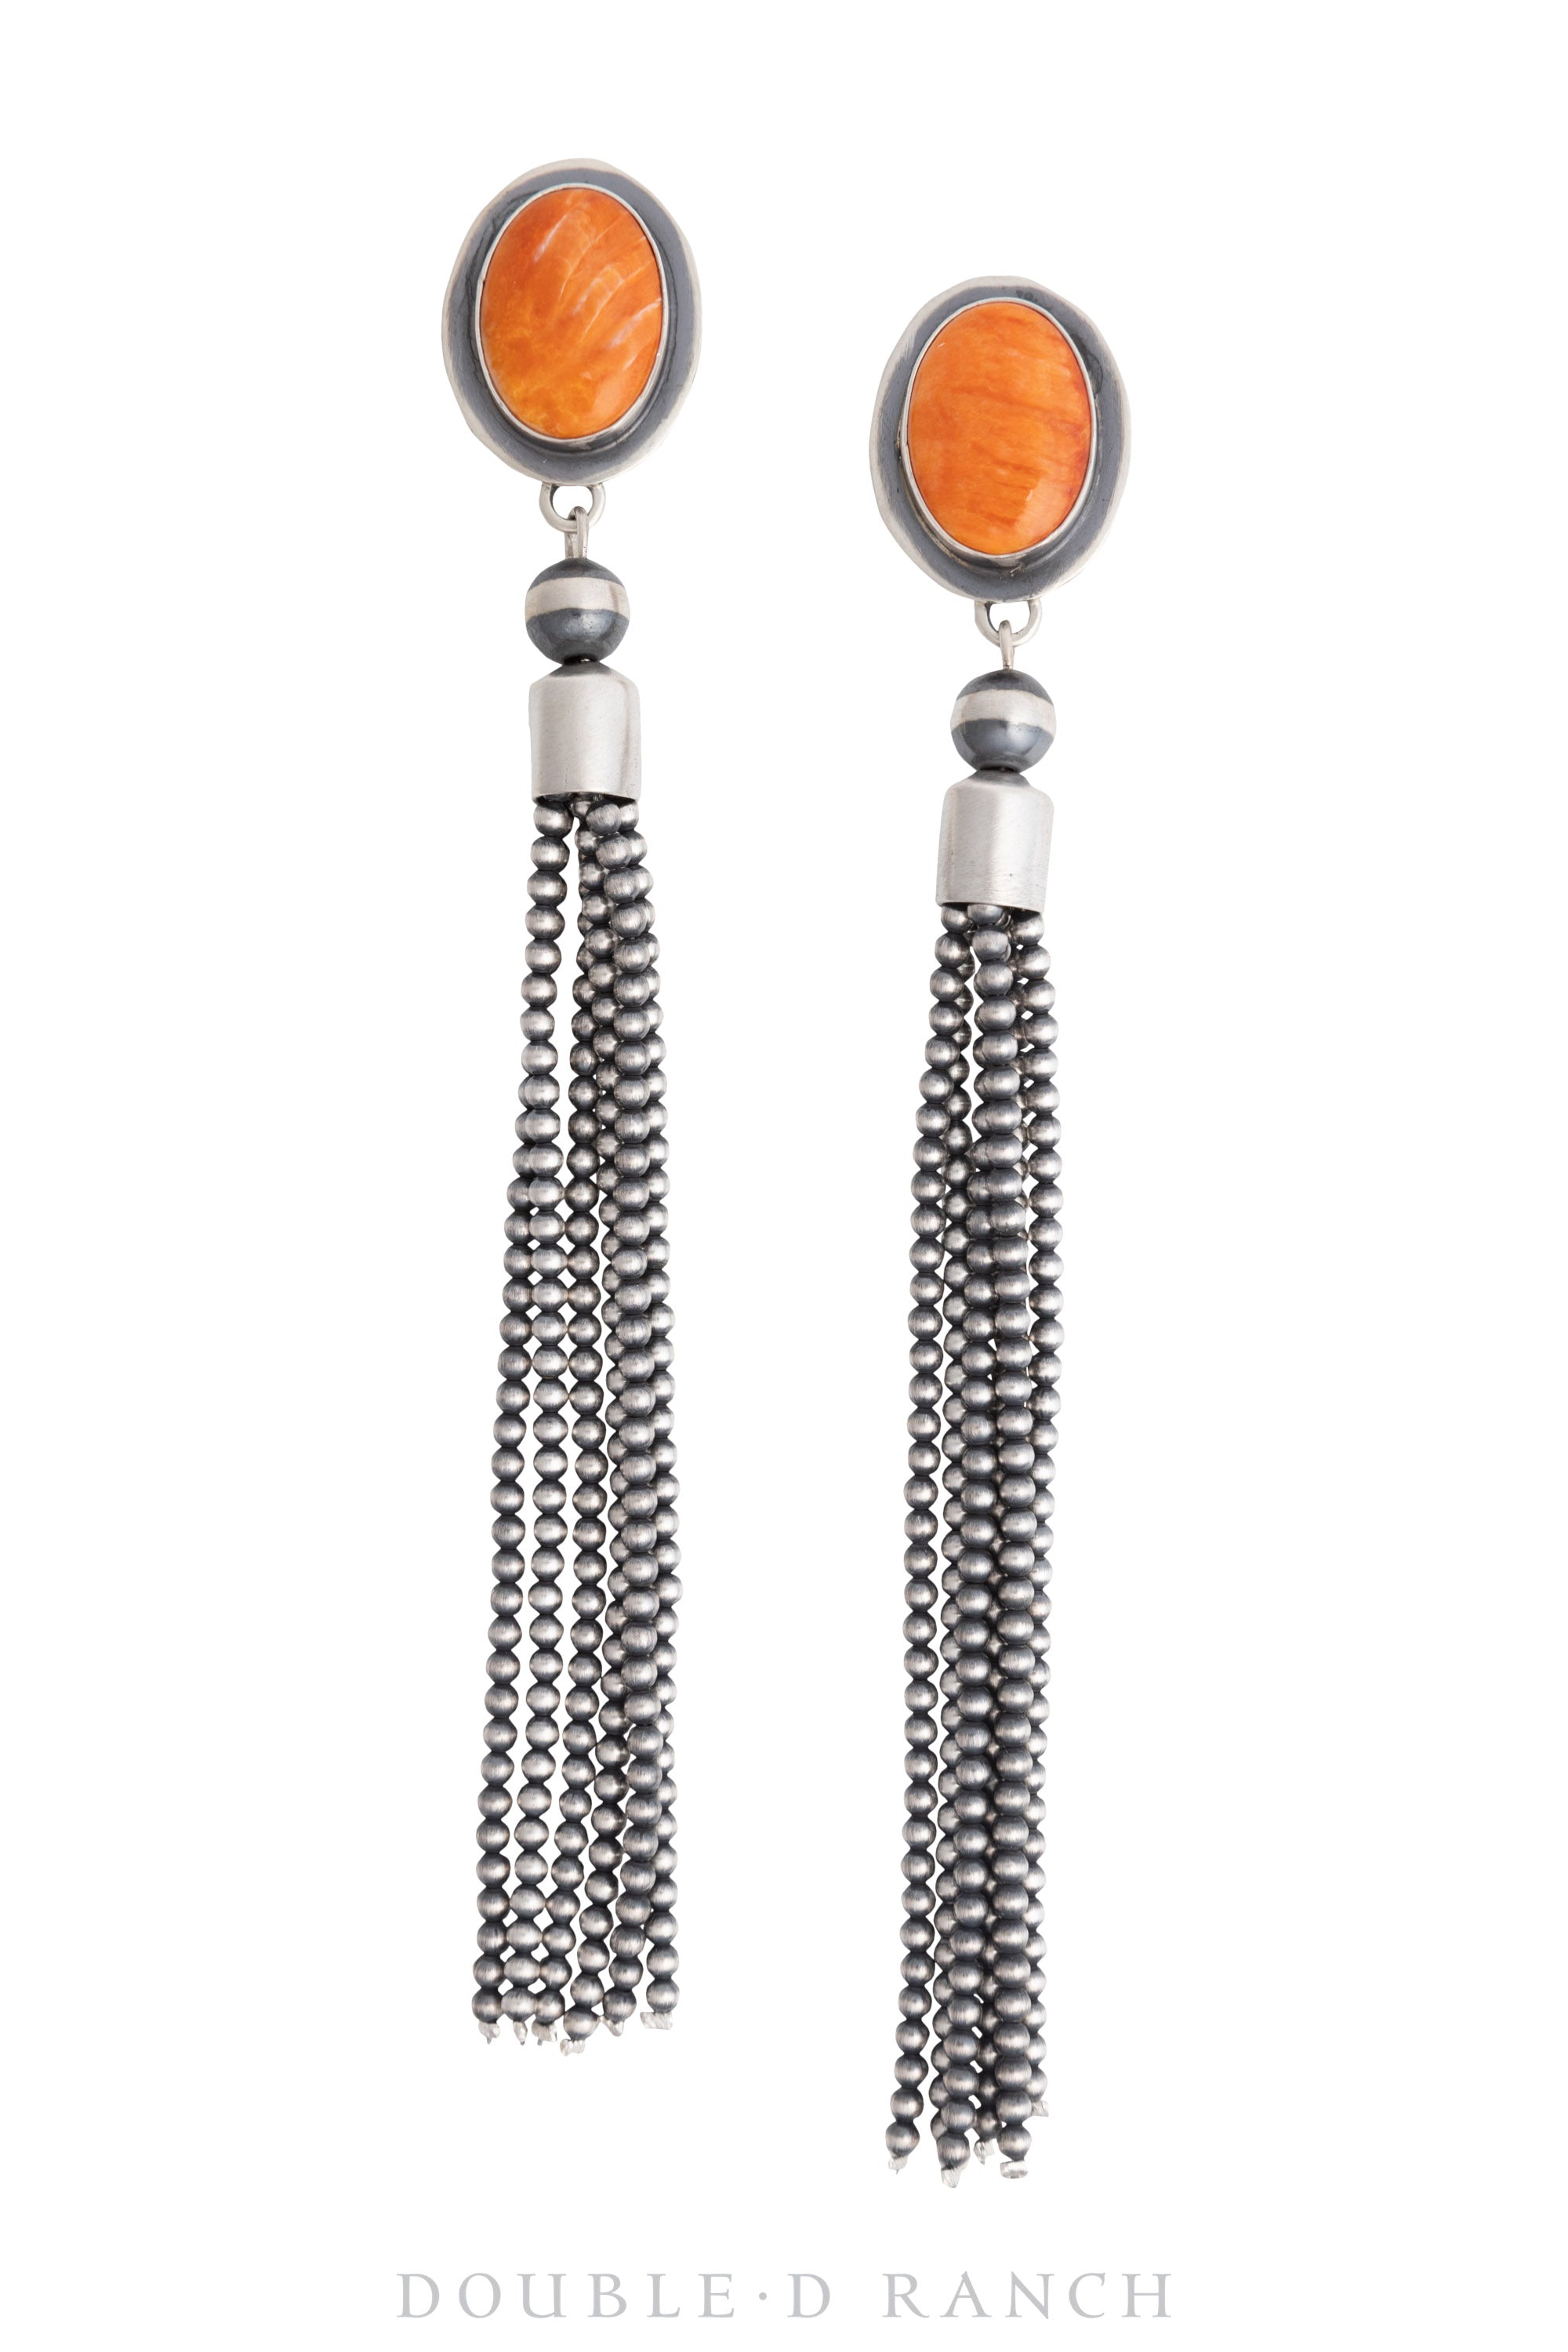 Earrings, Dangle, Sterling Silver, Orange Spiny Oyster, Contemporary, 1237